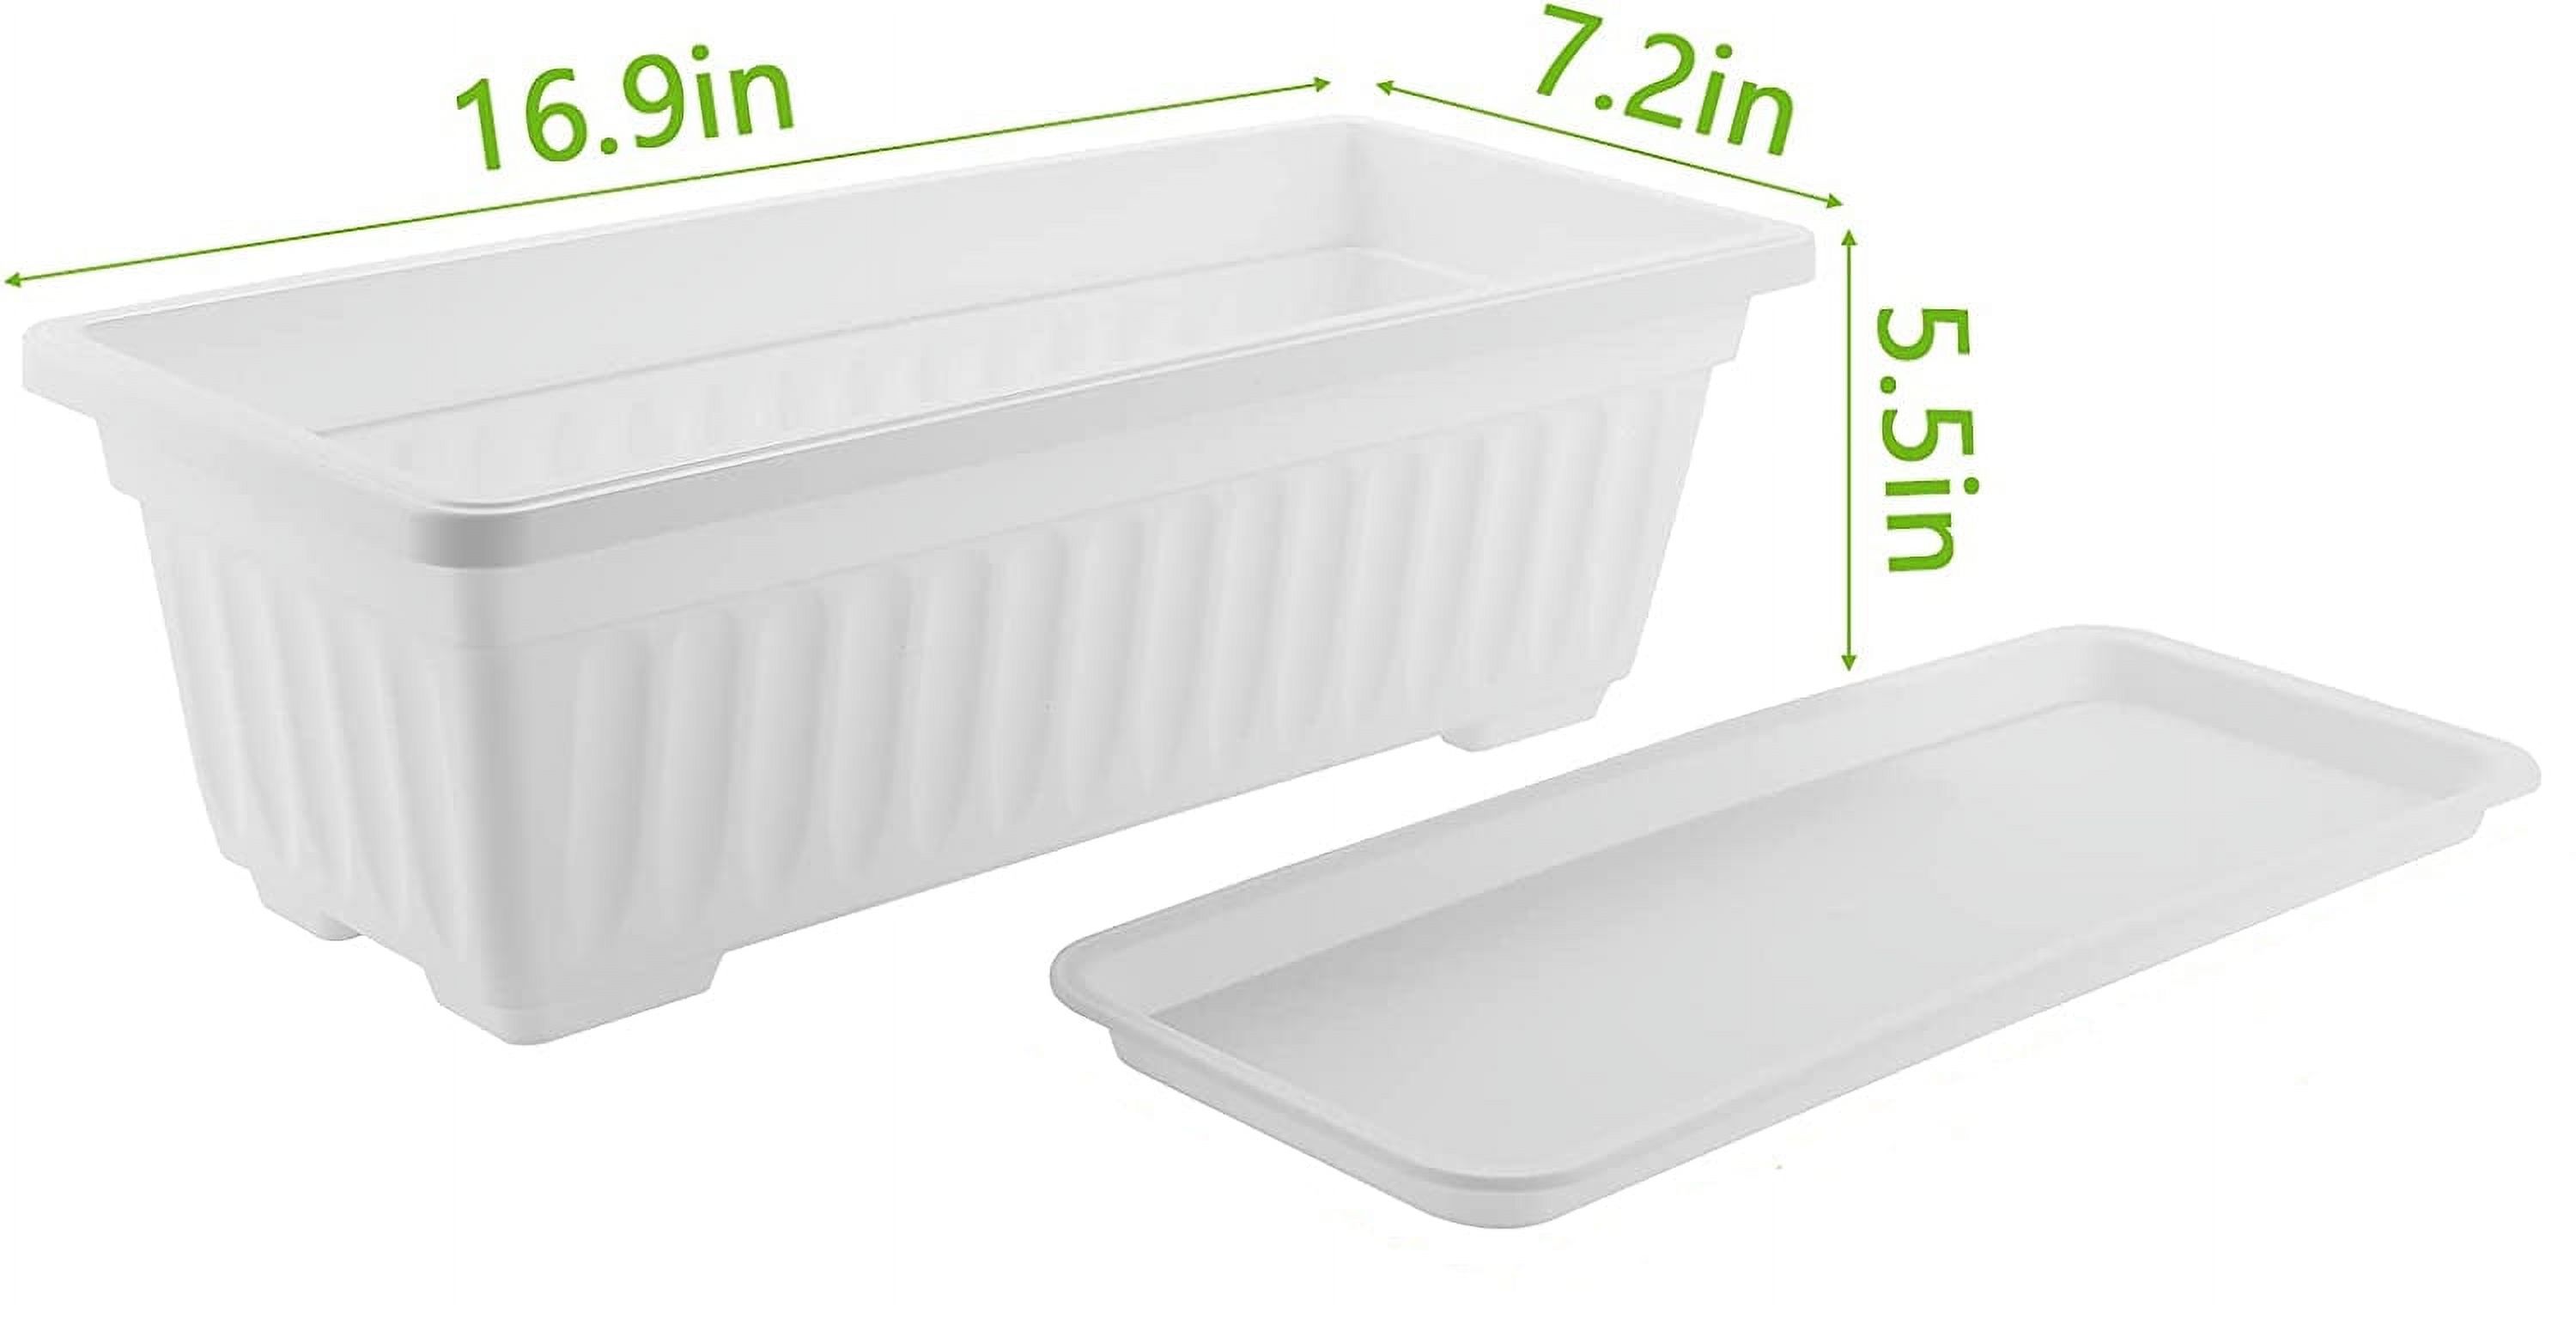 Triani 17 inch Rectangular Plastic Thicken Planters with Trays - Window Planter Box for Outdoor and Indoor Herbs, Vegetables, Flowers and Succulent Plants (1 Pack White) - image 1 of 8